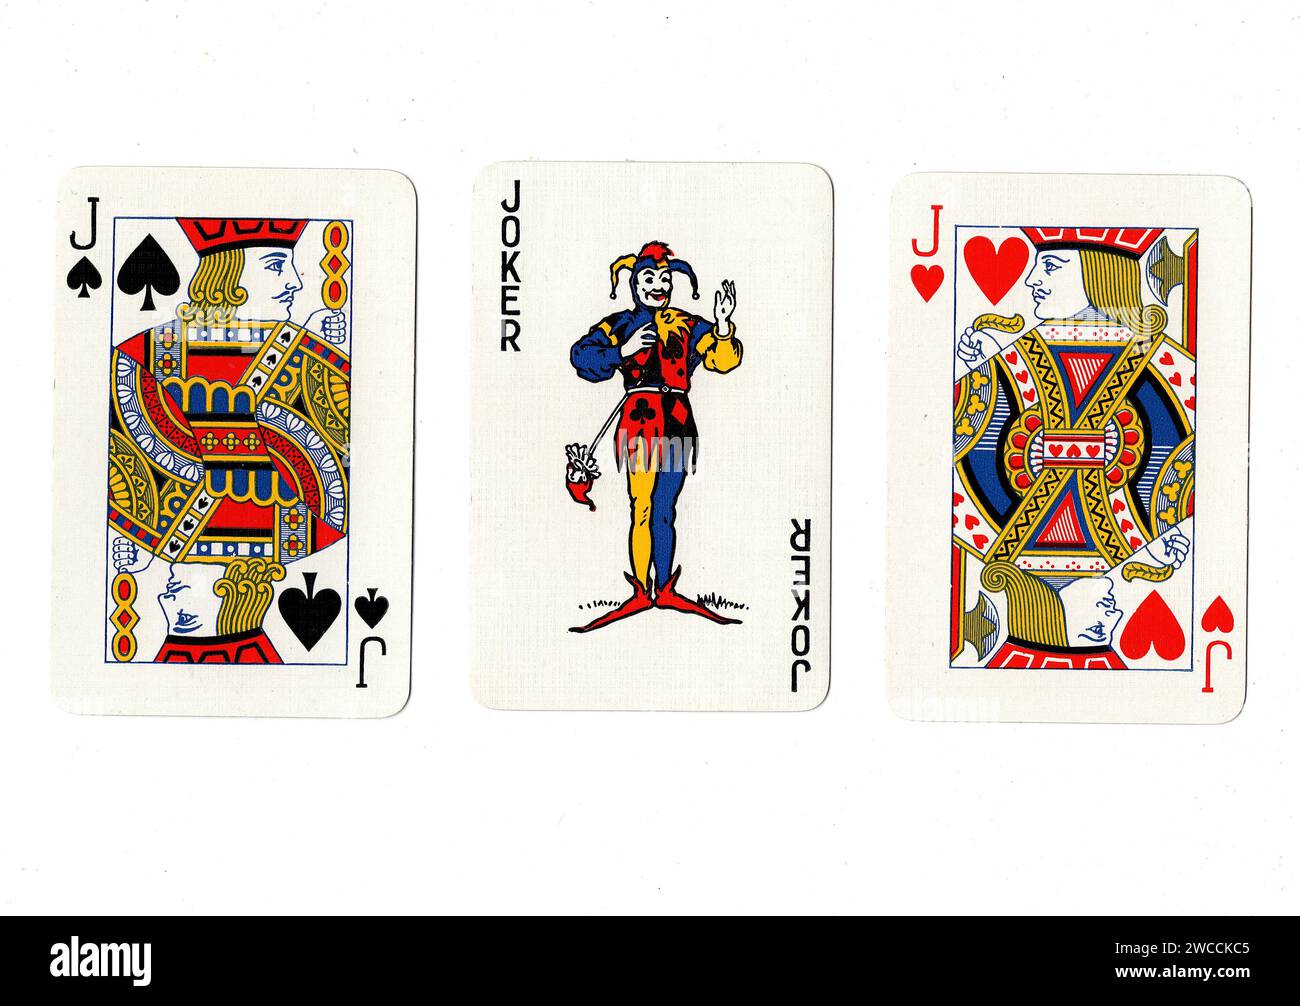 Vintage playing cards showing a pair of jacks and a joker isolated on a white background. Stock Photo